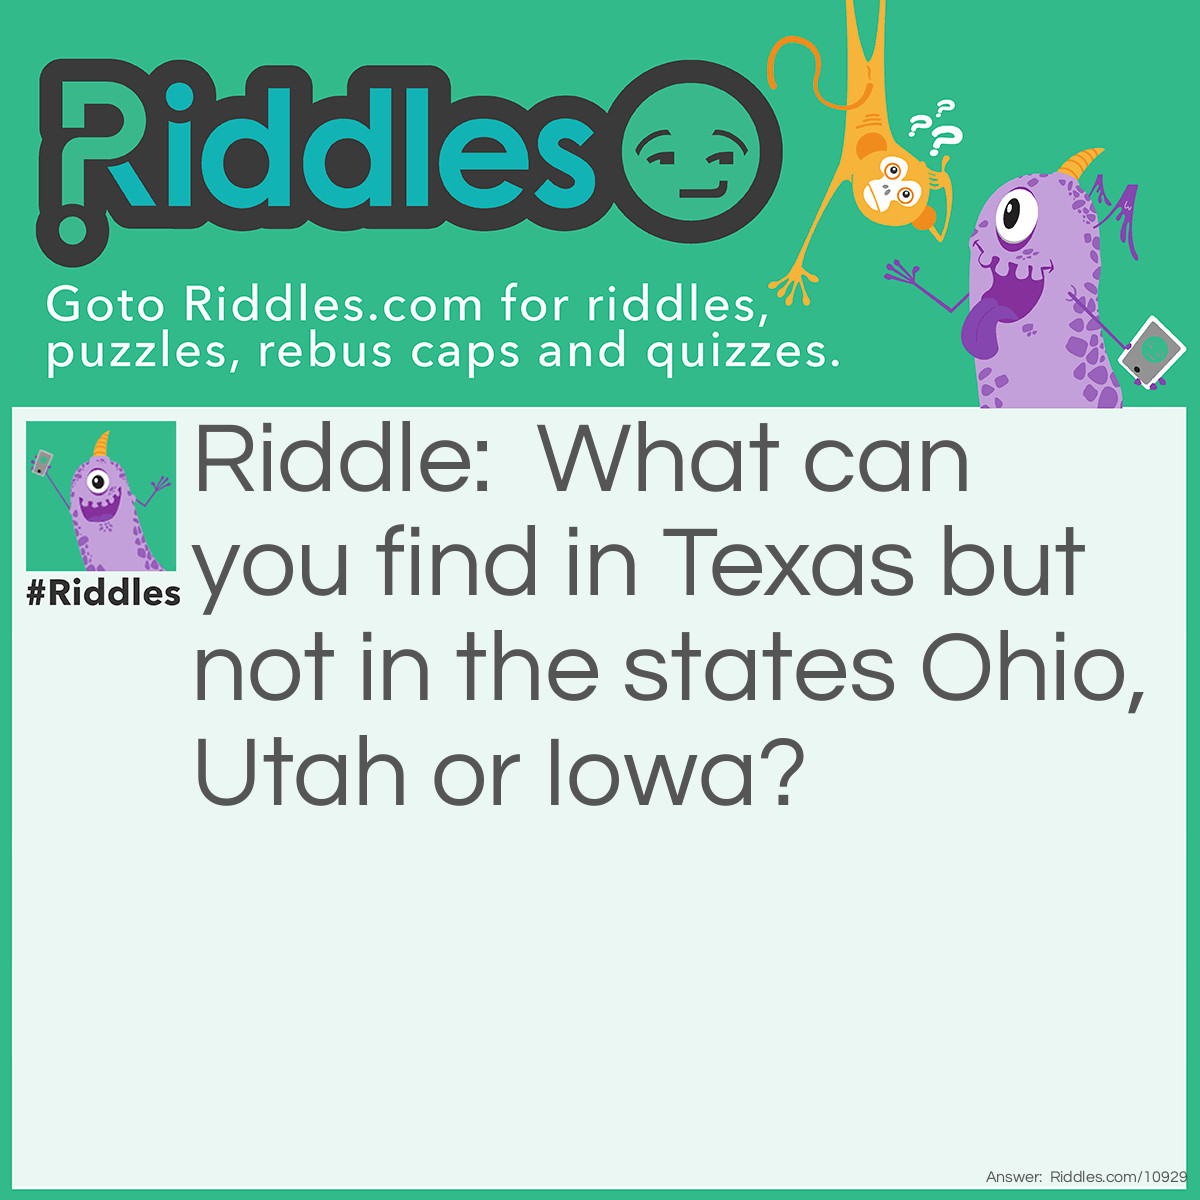 Riddle: What can you find in Texas but not in the states Ohio, Utah or Iowa? Answer: The vowel “e”.